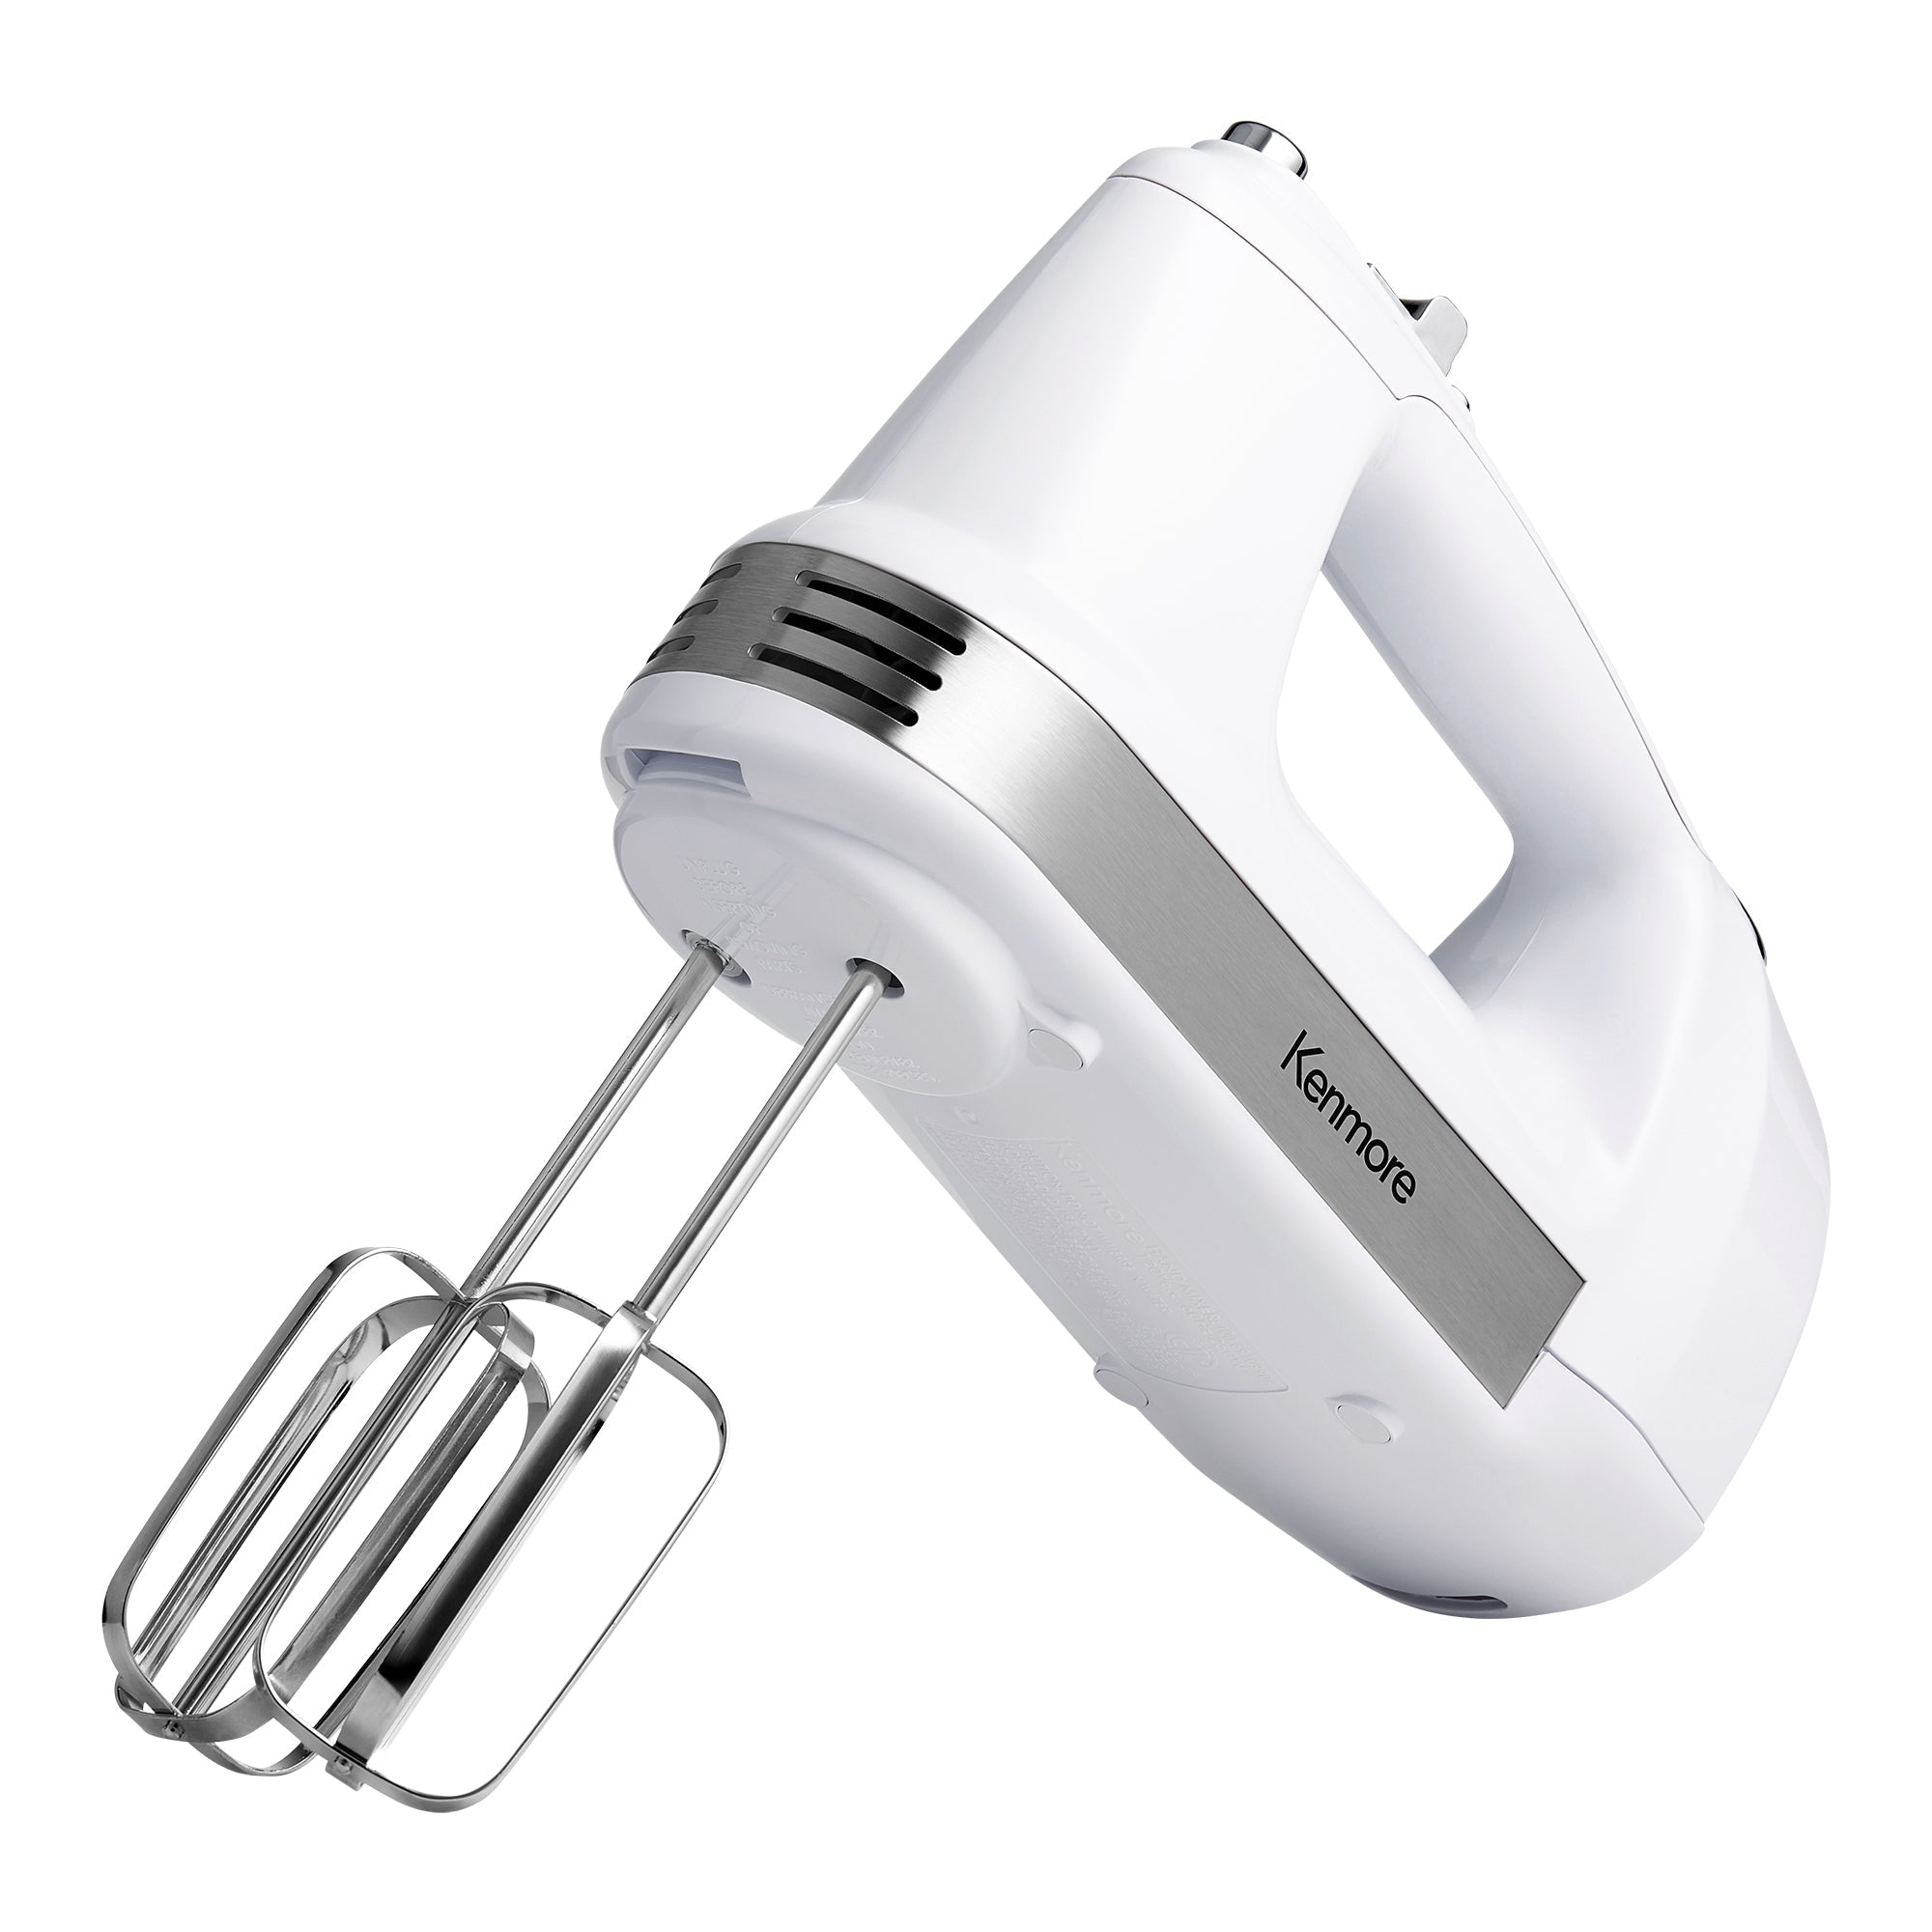 Product shot of hand mixer on white background with beaters attachedKenmore 5-speed hand mixer on white background with beaters attached